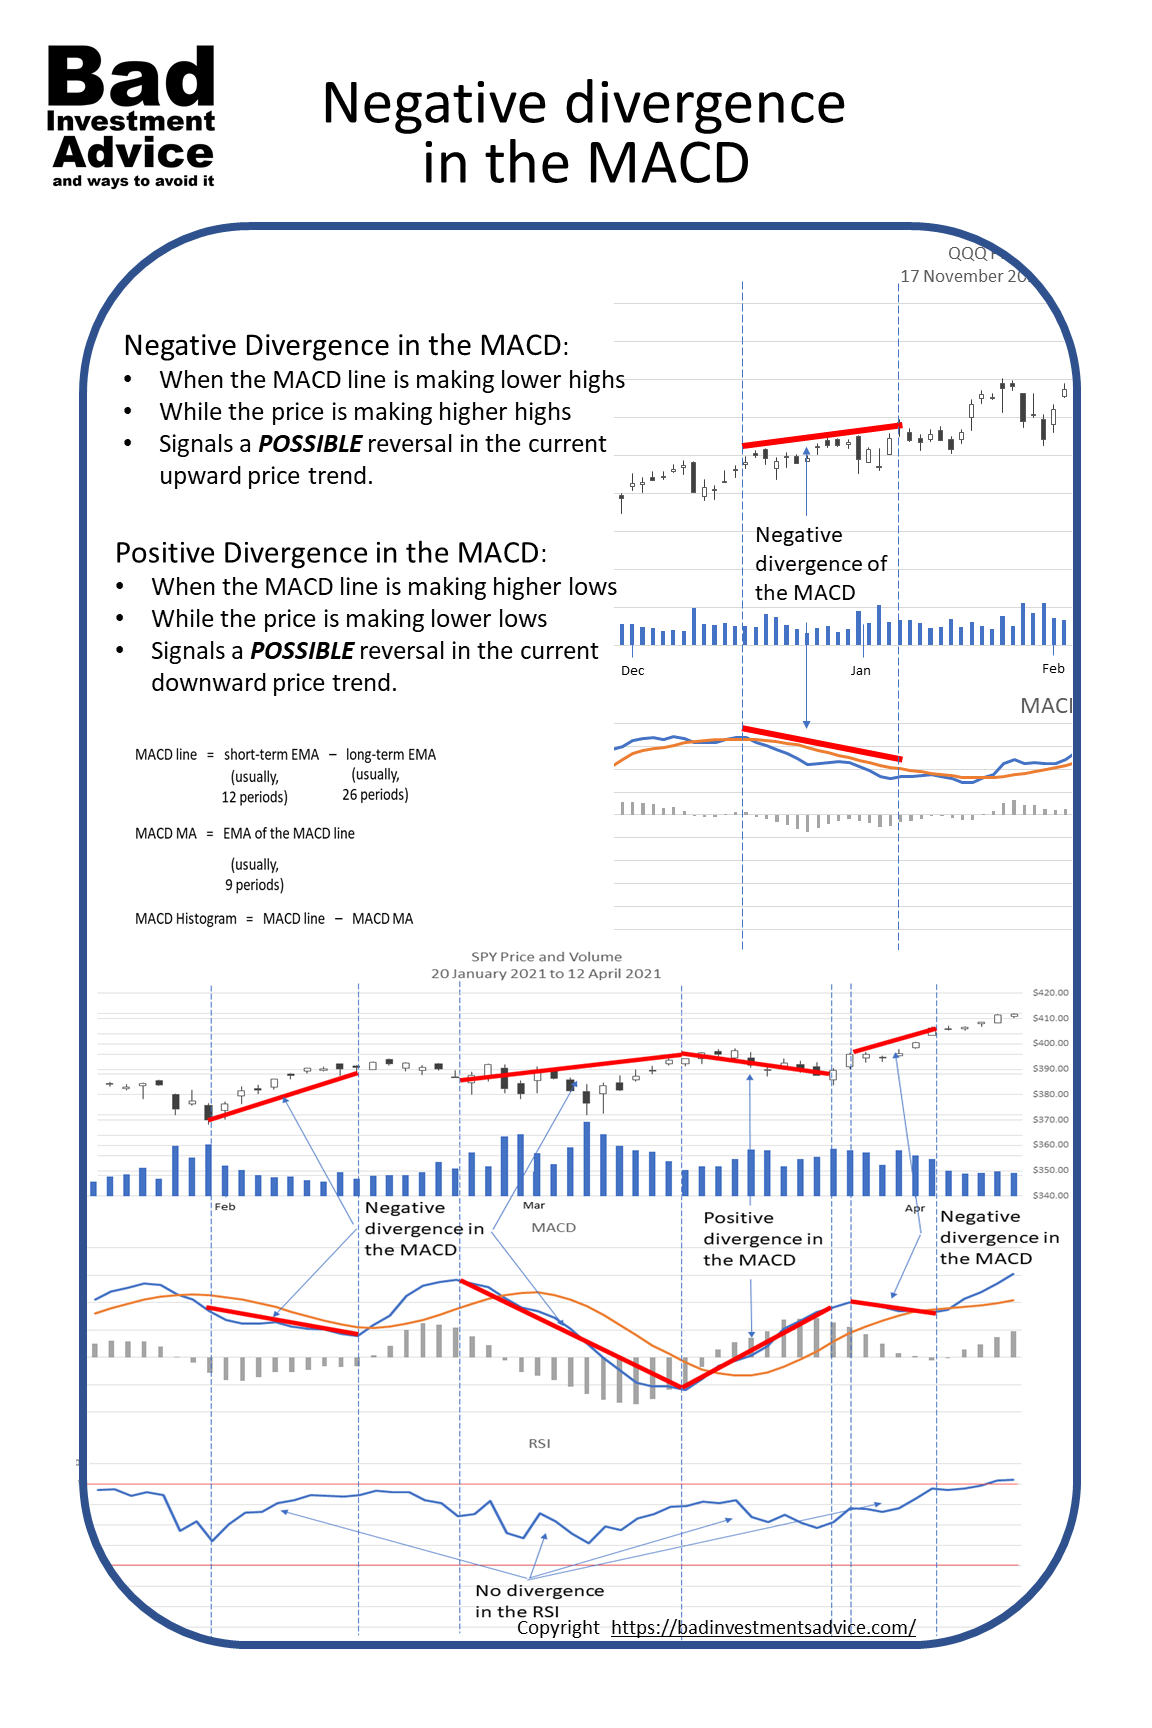 What is negative divergence in the MACD summary